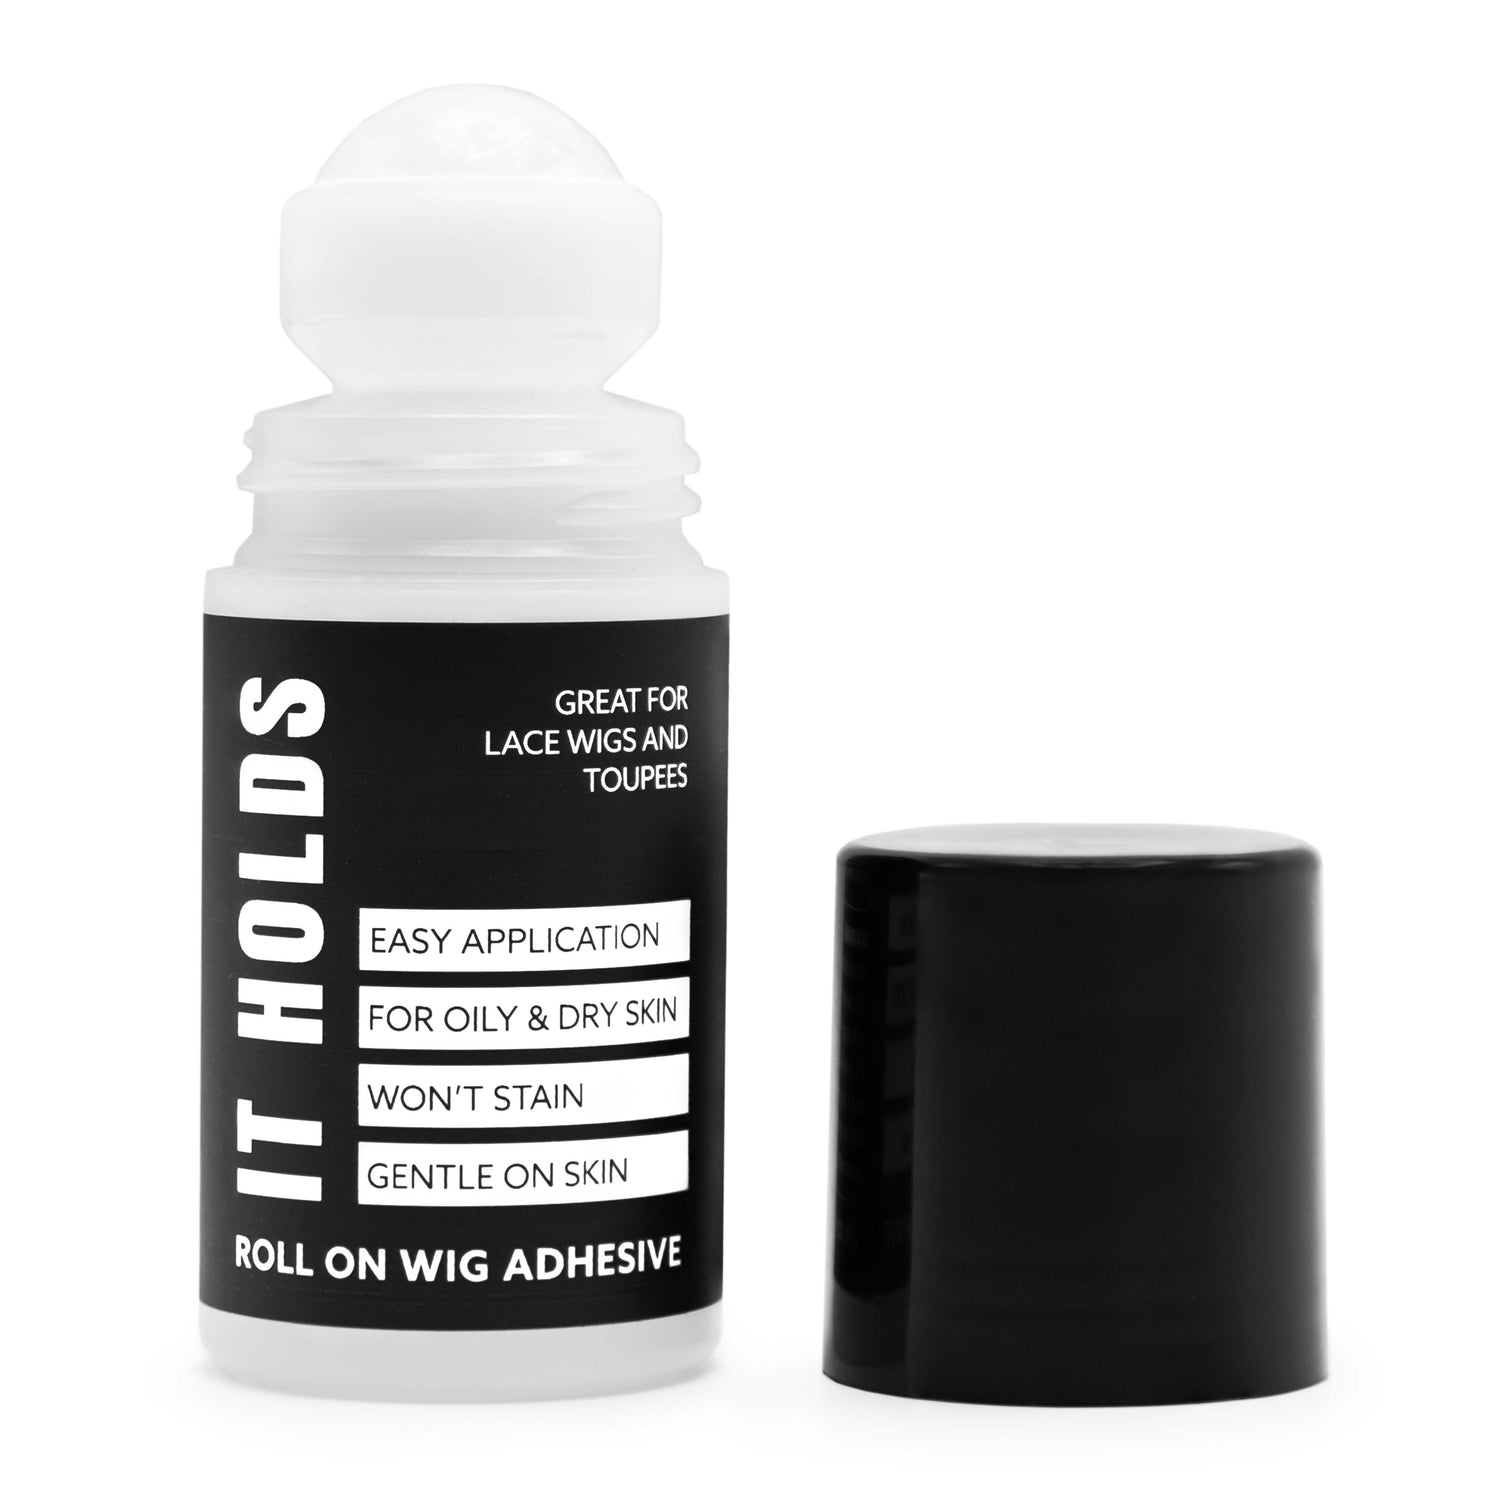 It Holds Roll On Wig Adhesive 2.0oz Bottle –